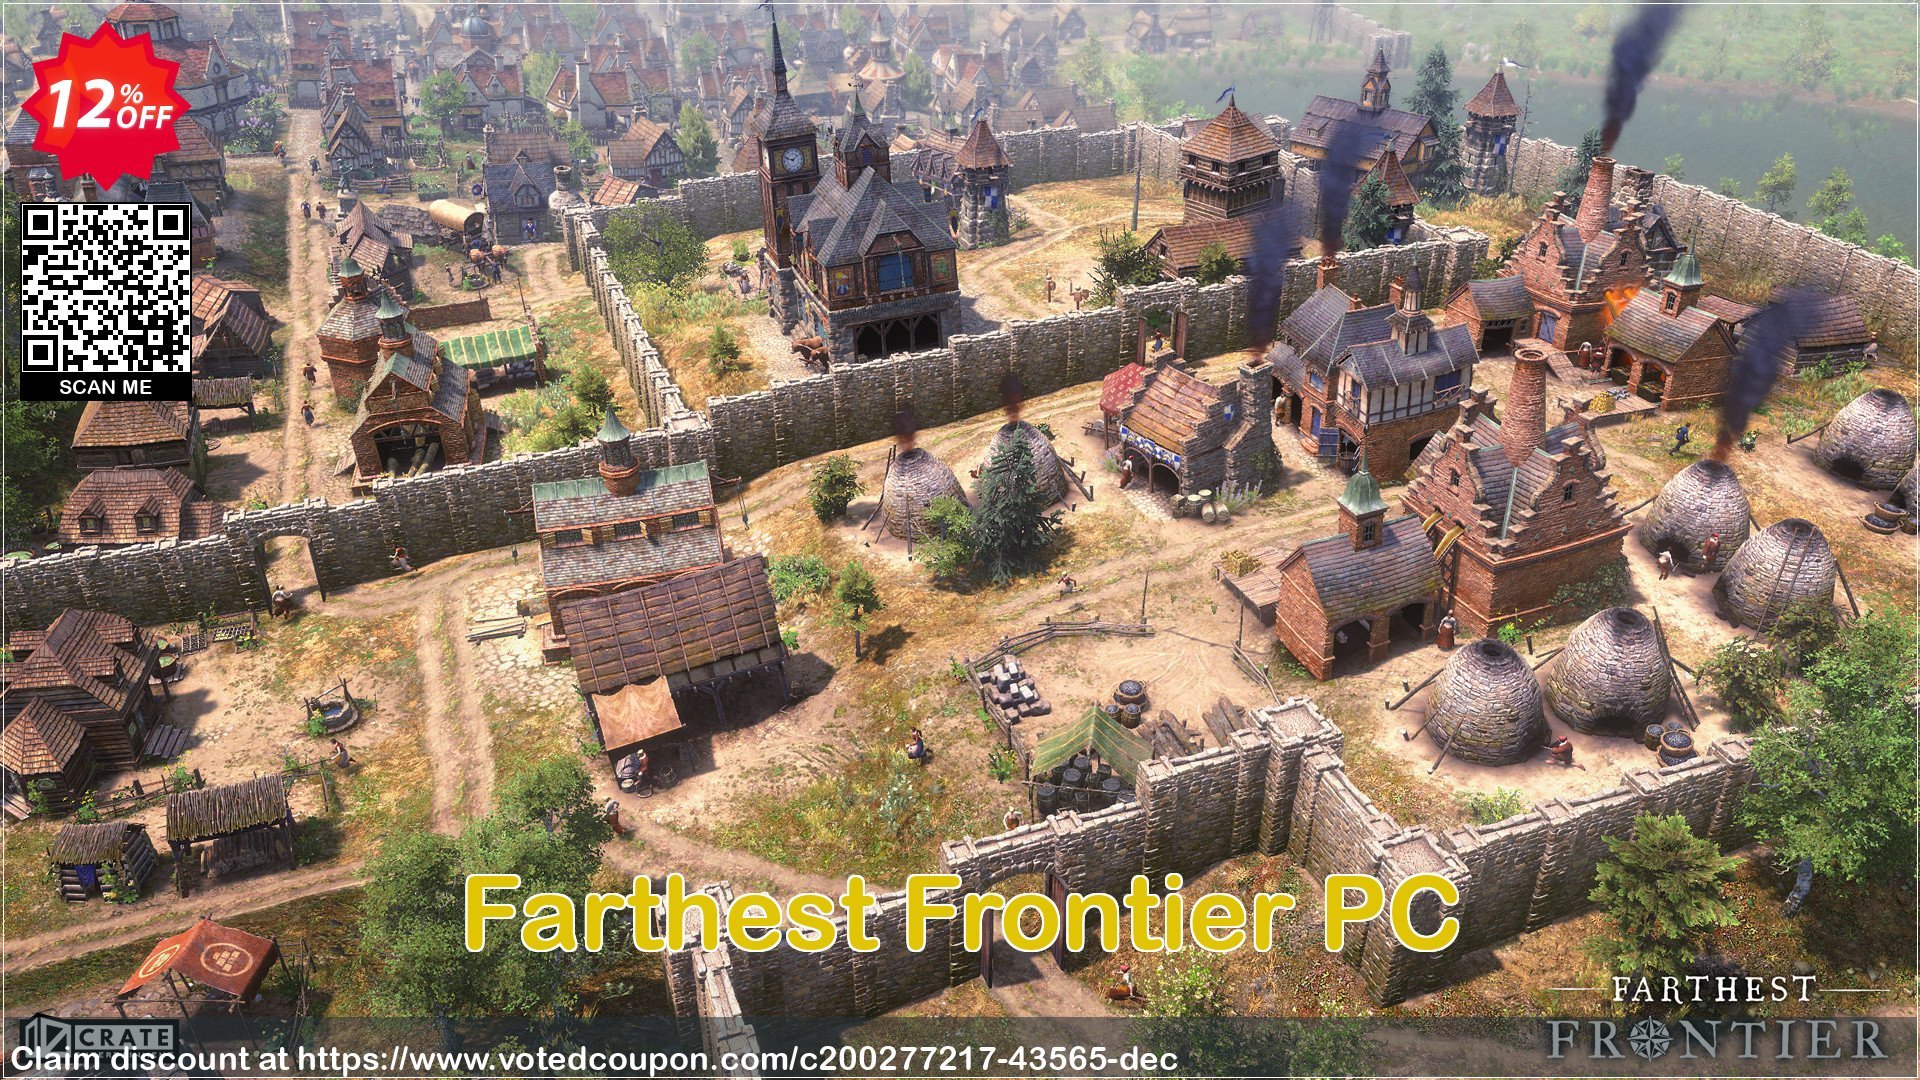 Farthest Frontier PC Coupon Code Apr 2024, 12% OFF - VotedCoupon